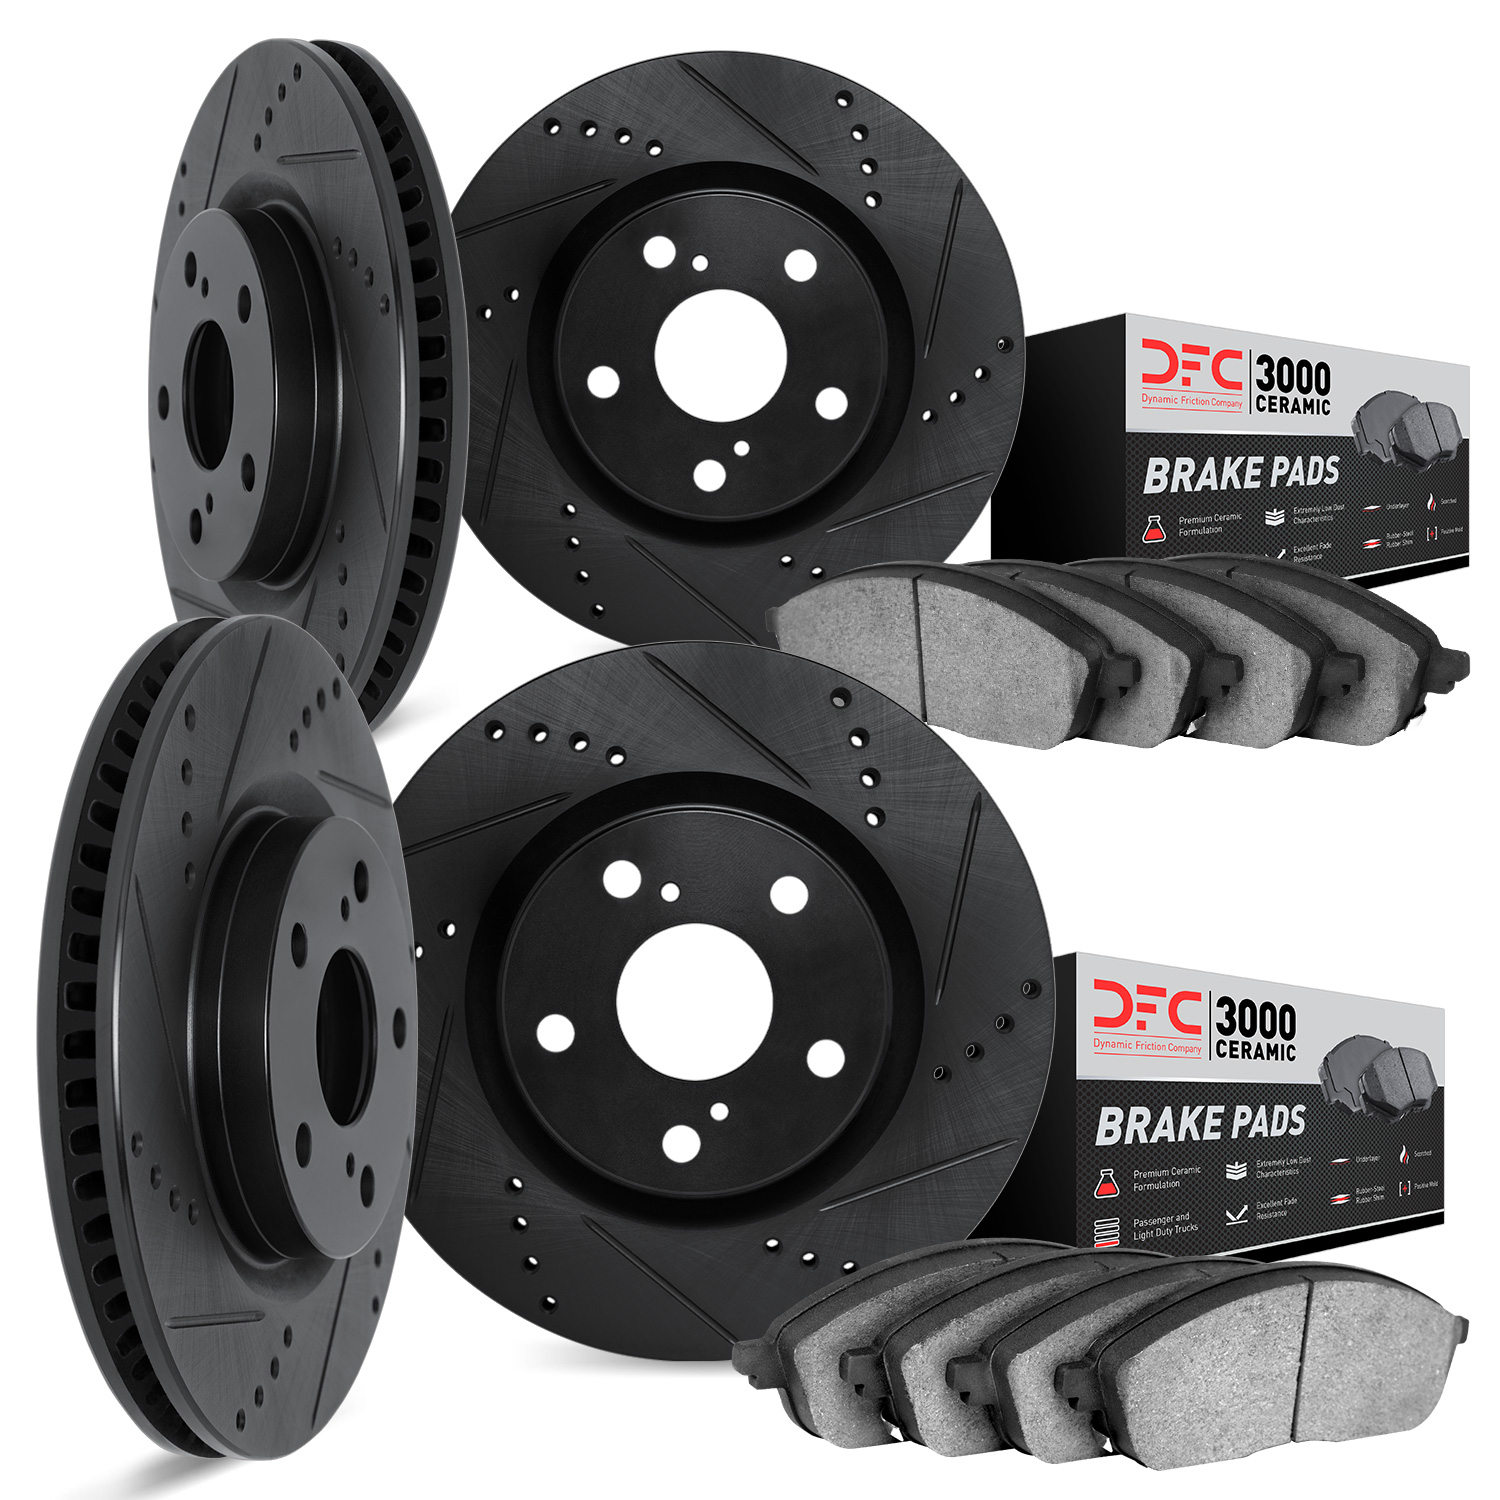 8304-31070 Drilled/Slotted Brake Rotors with 3000-Series Ceramic Brake Pads Kit [Black], 2007-2019 BMW, Position: Front and Rear